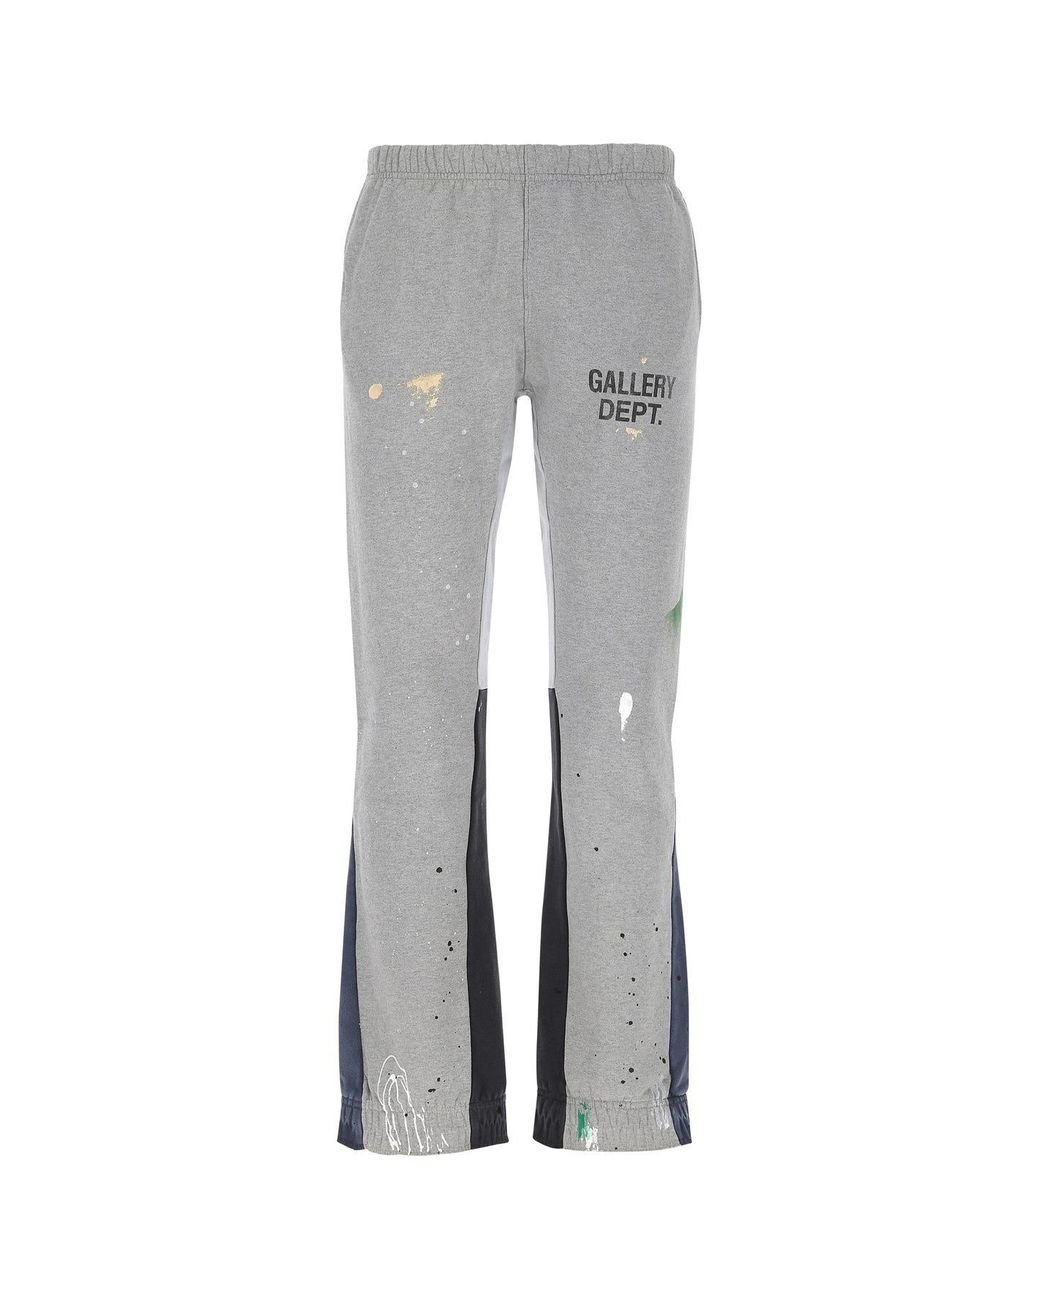 GALLERY DEPT. Cotton joggers in Gray for Men